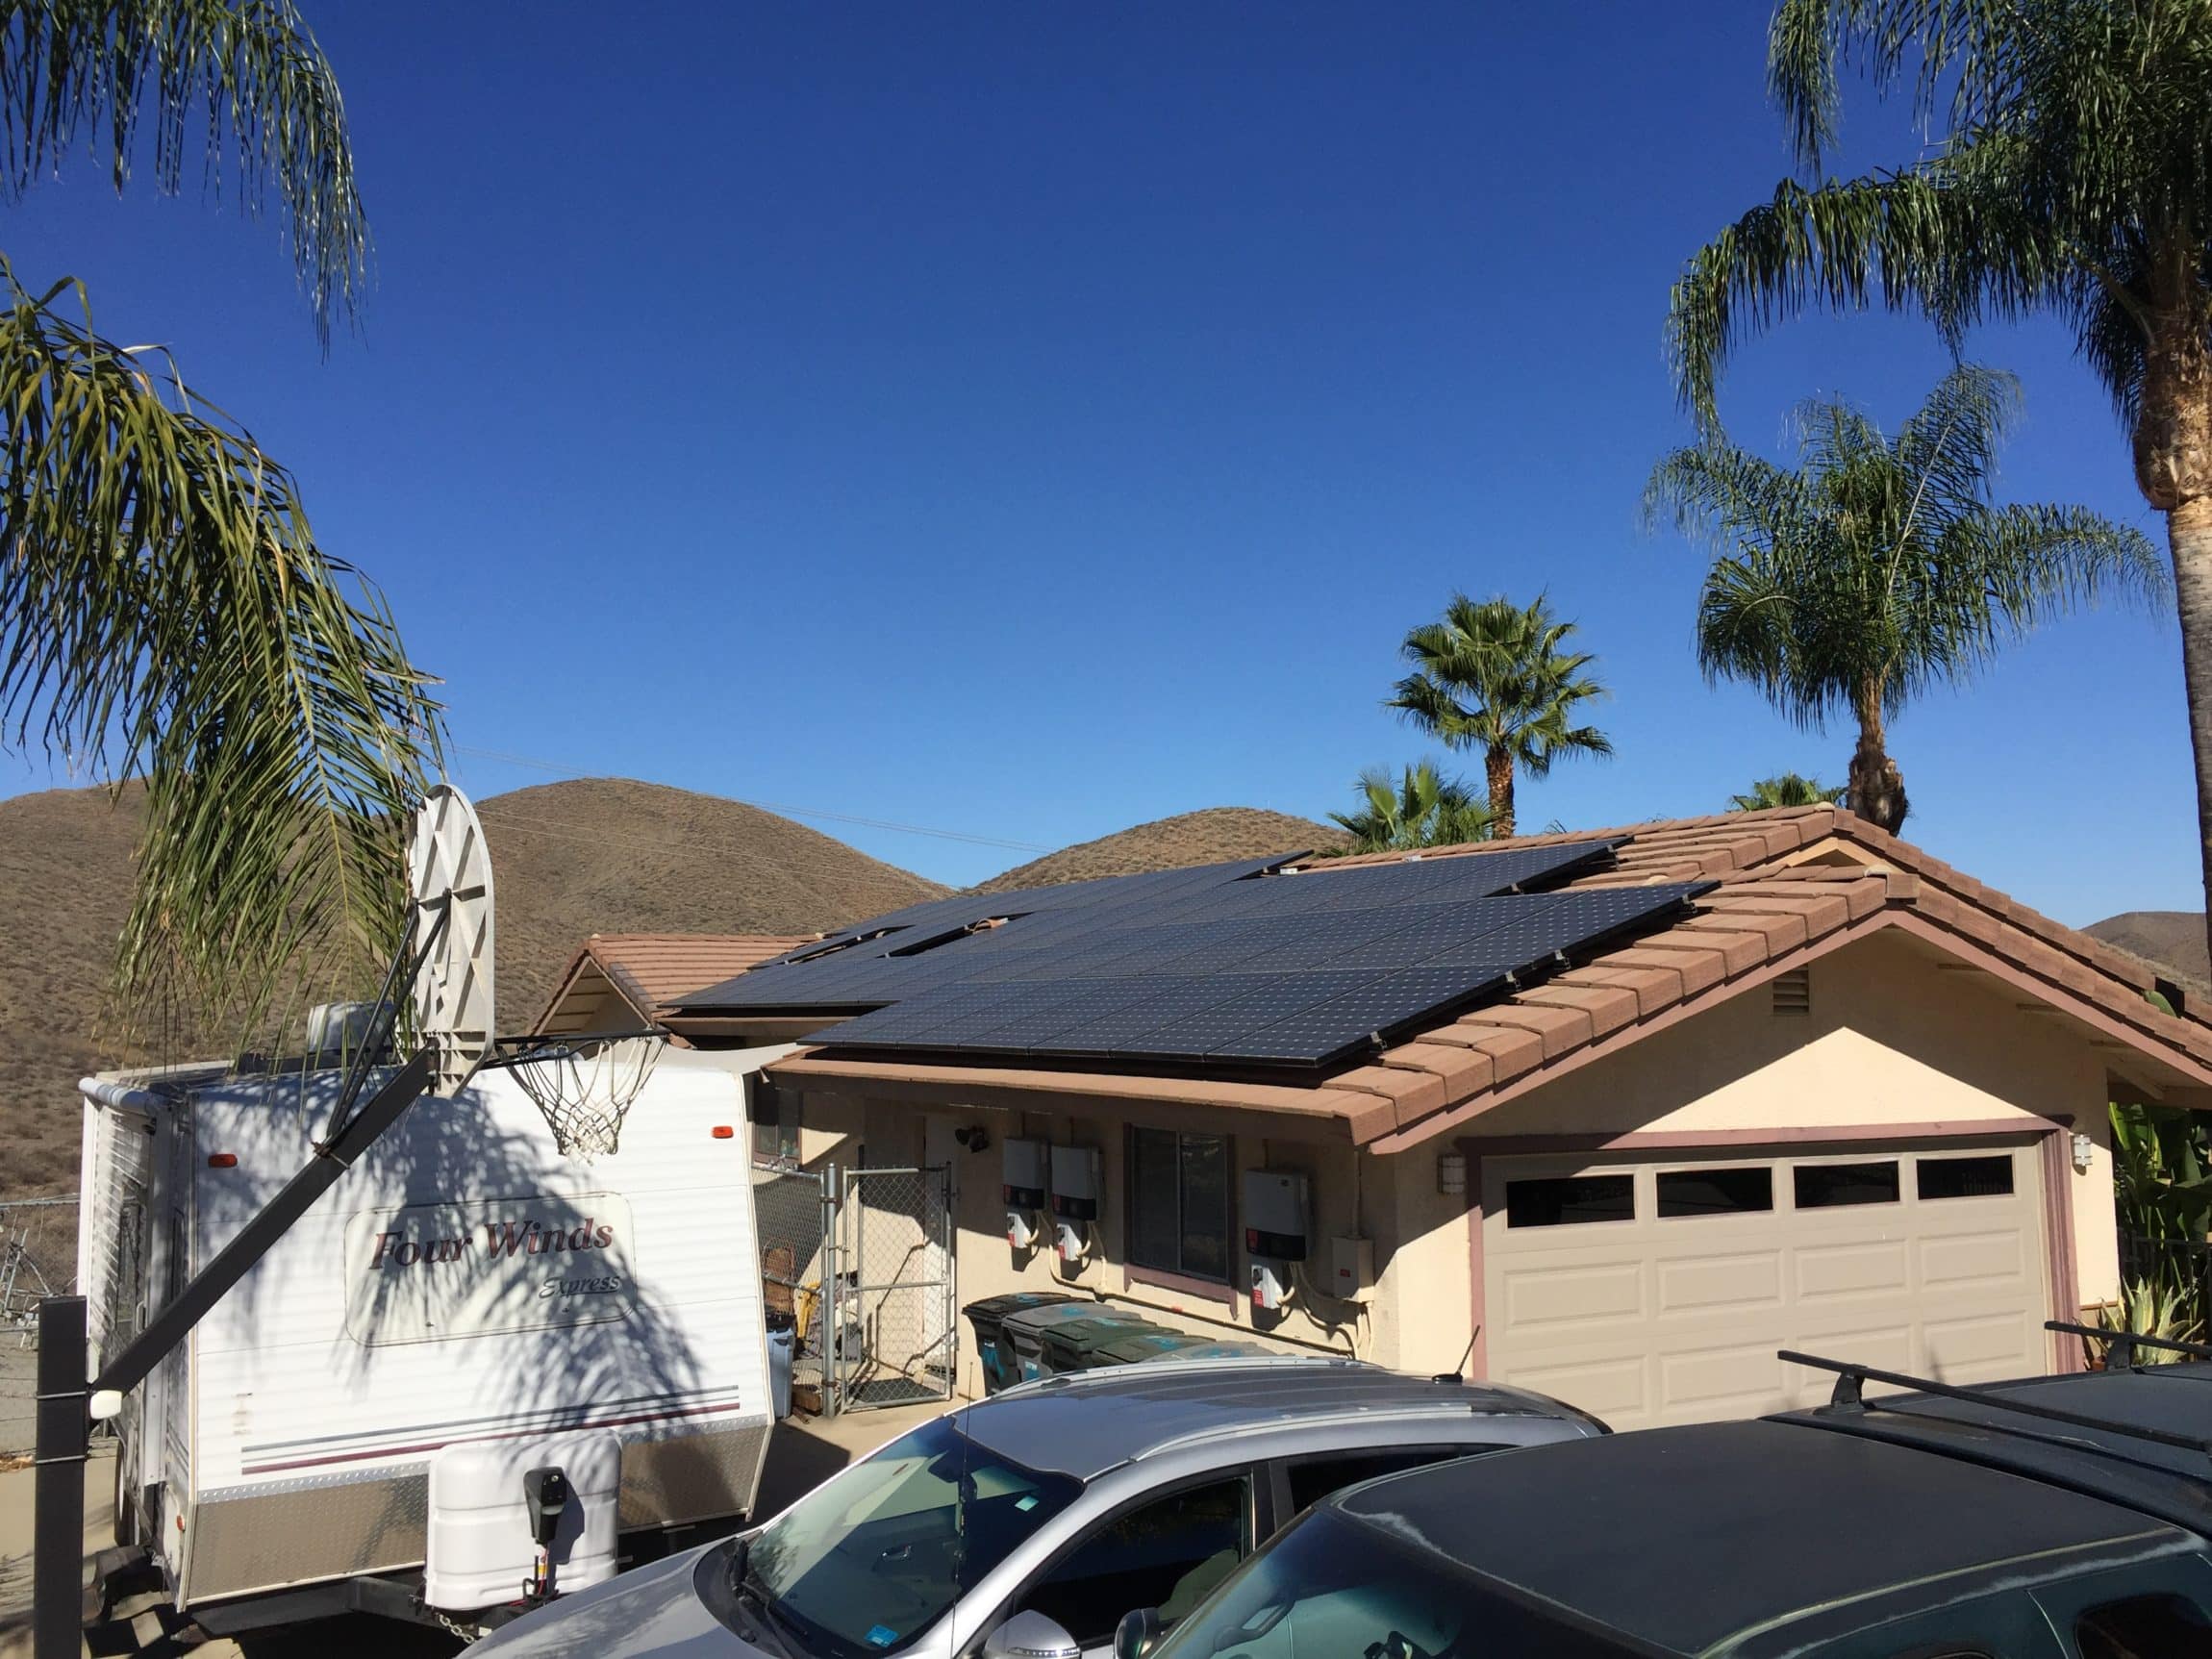 Exterior View of home with Solar Panels Installed on Roof